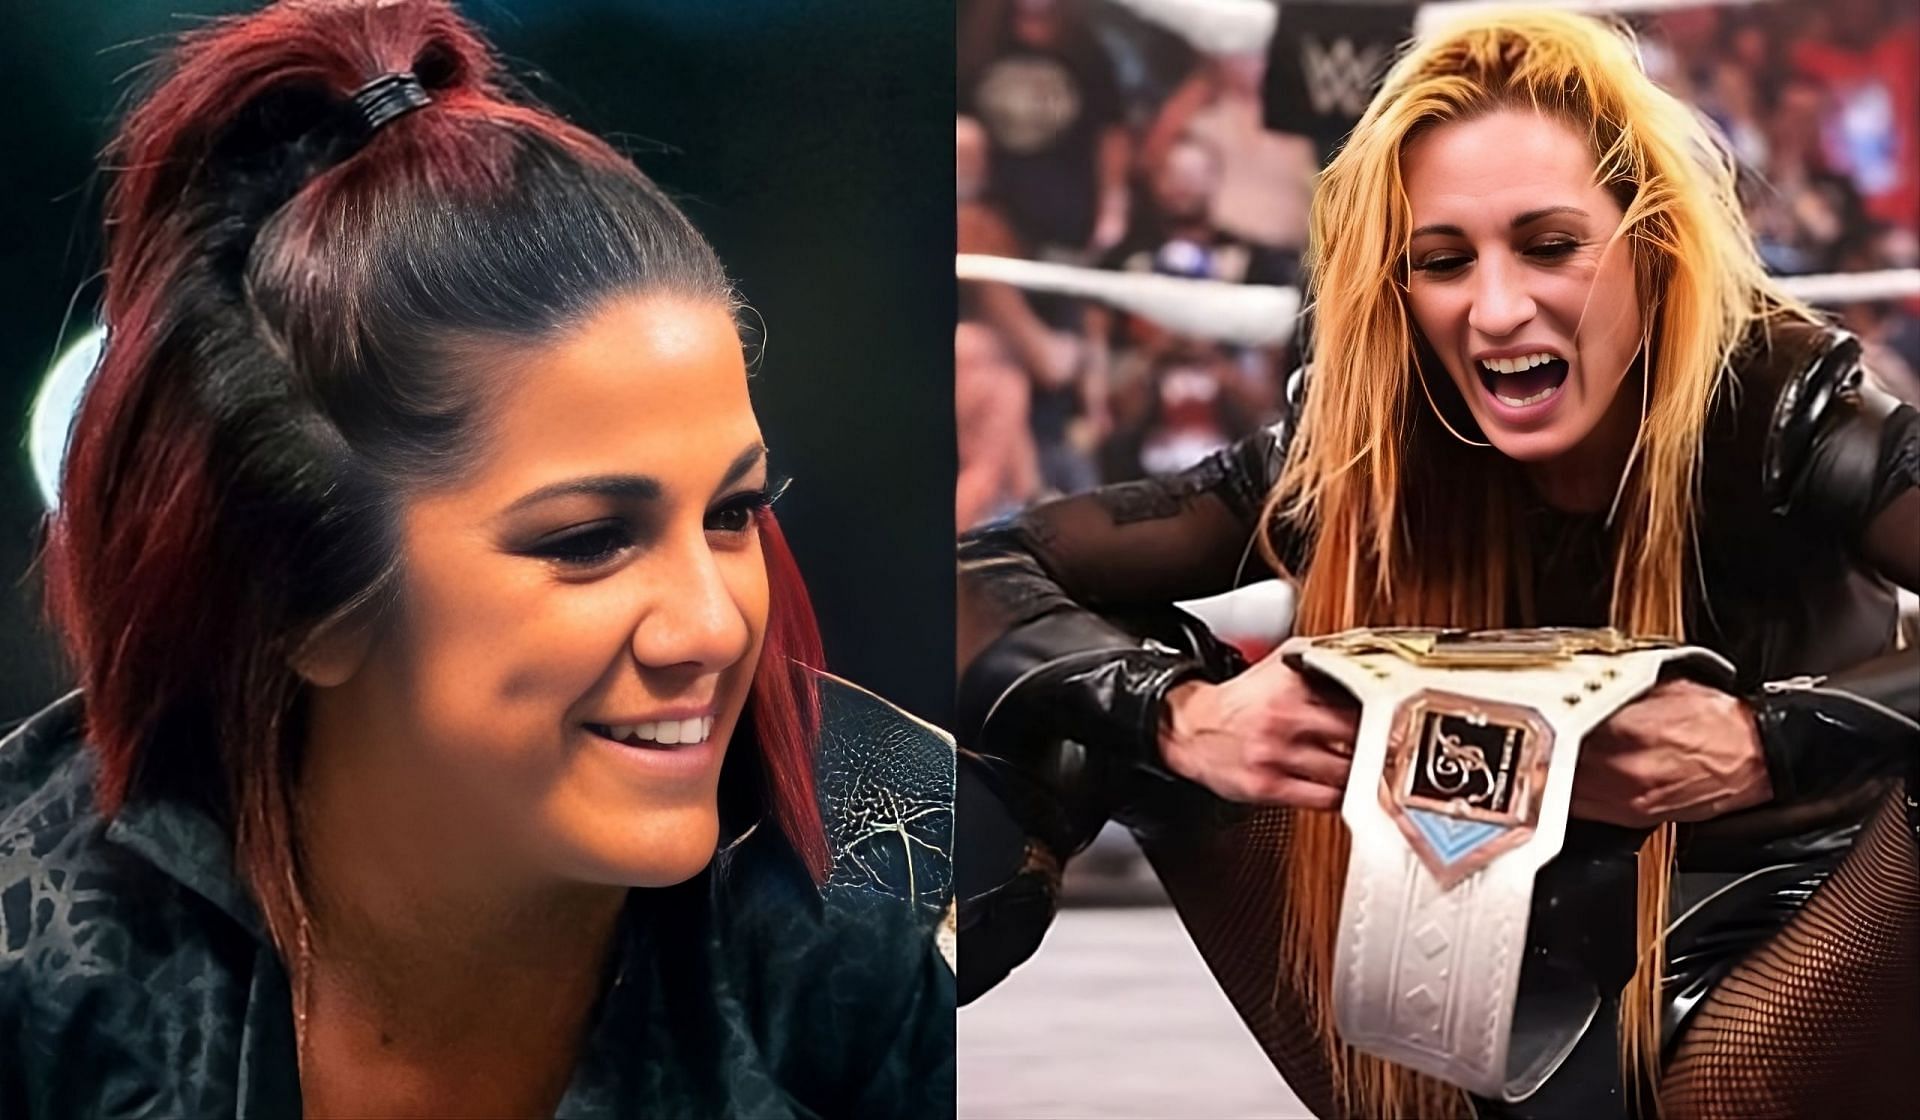 Bayley(left) and Becky Lynch(right)  